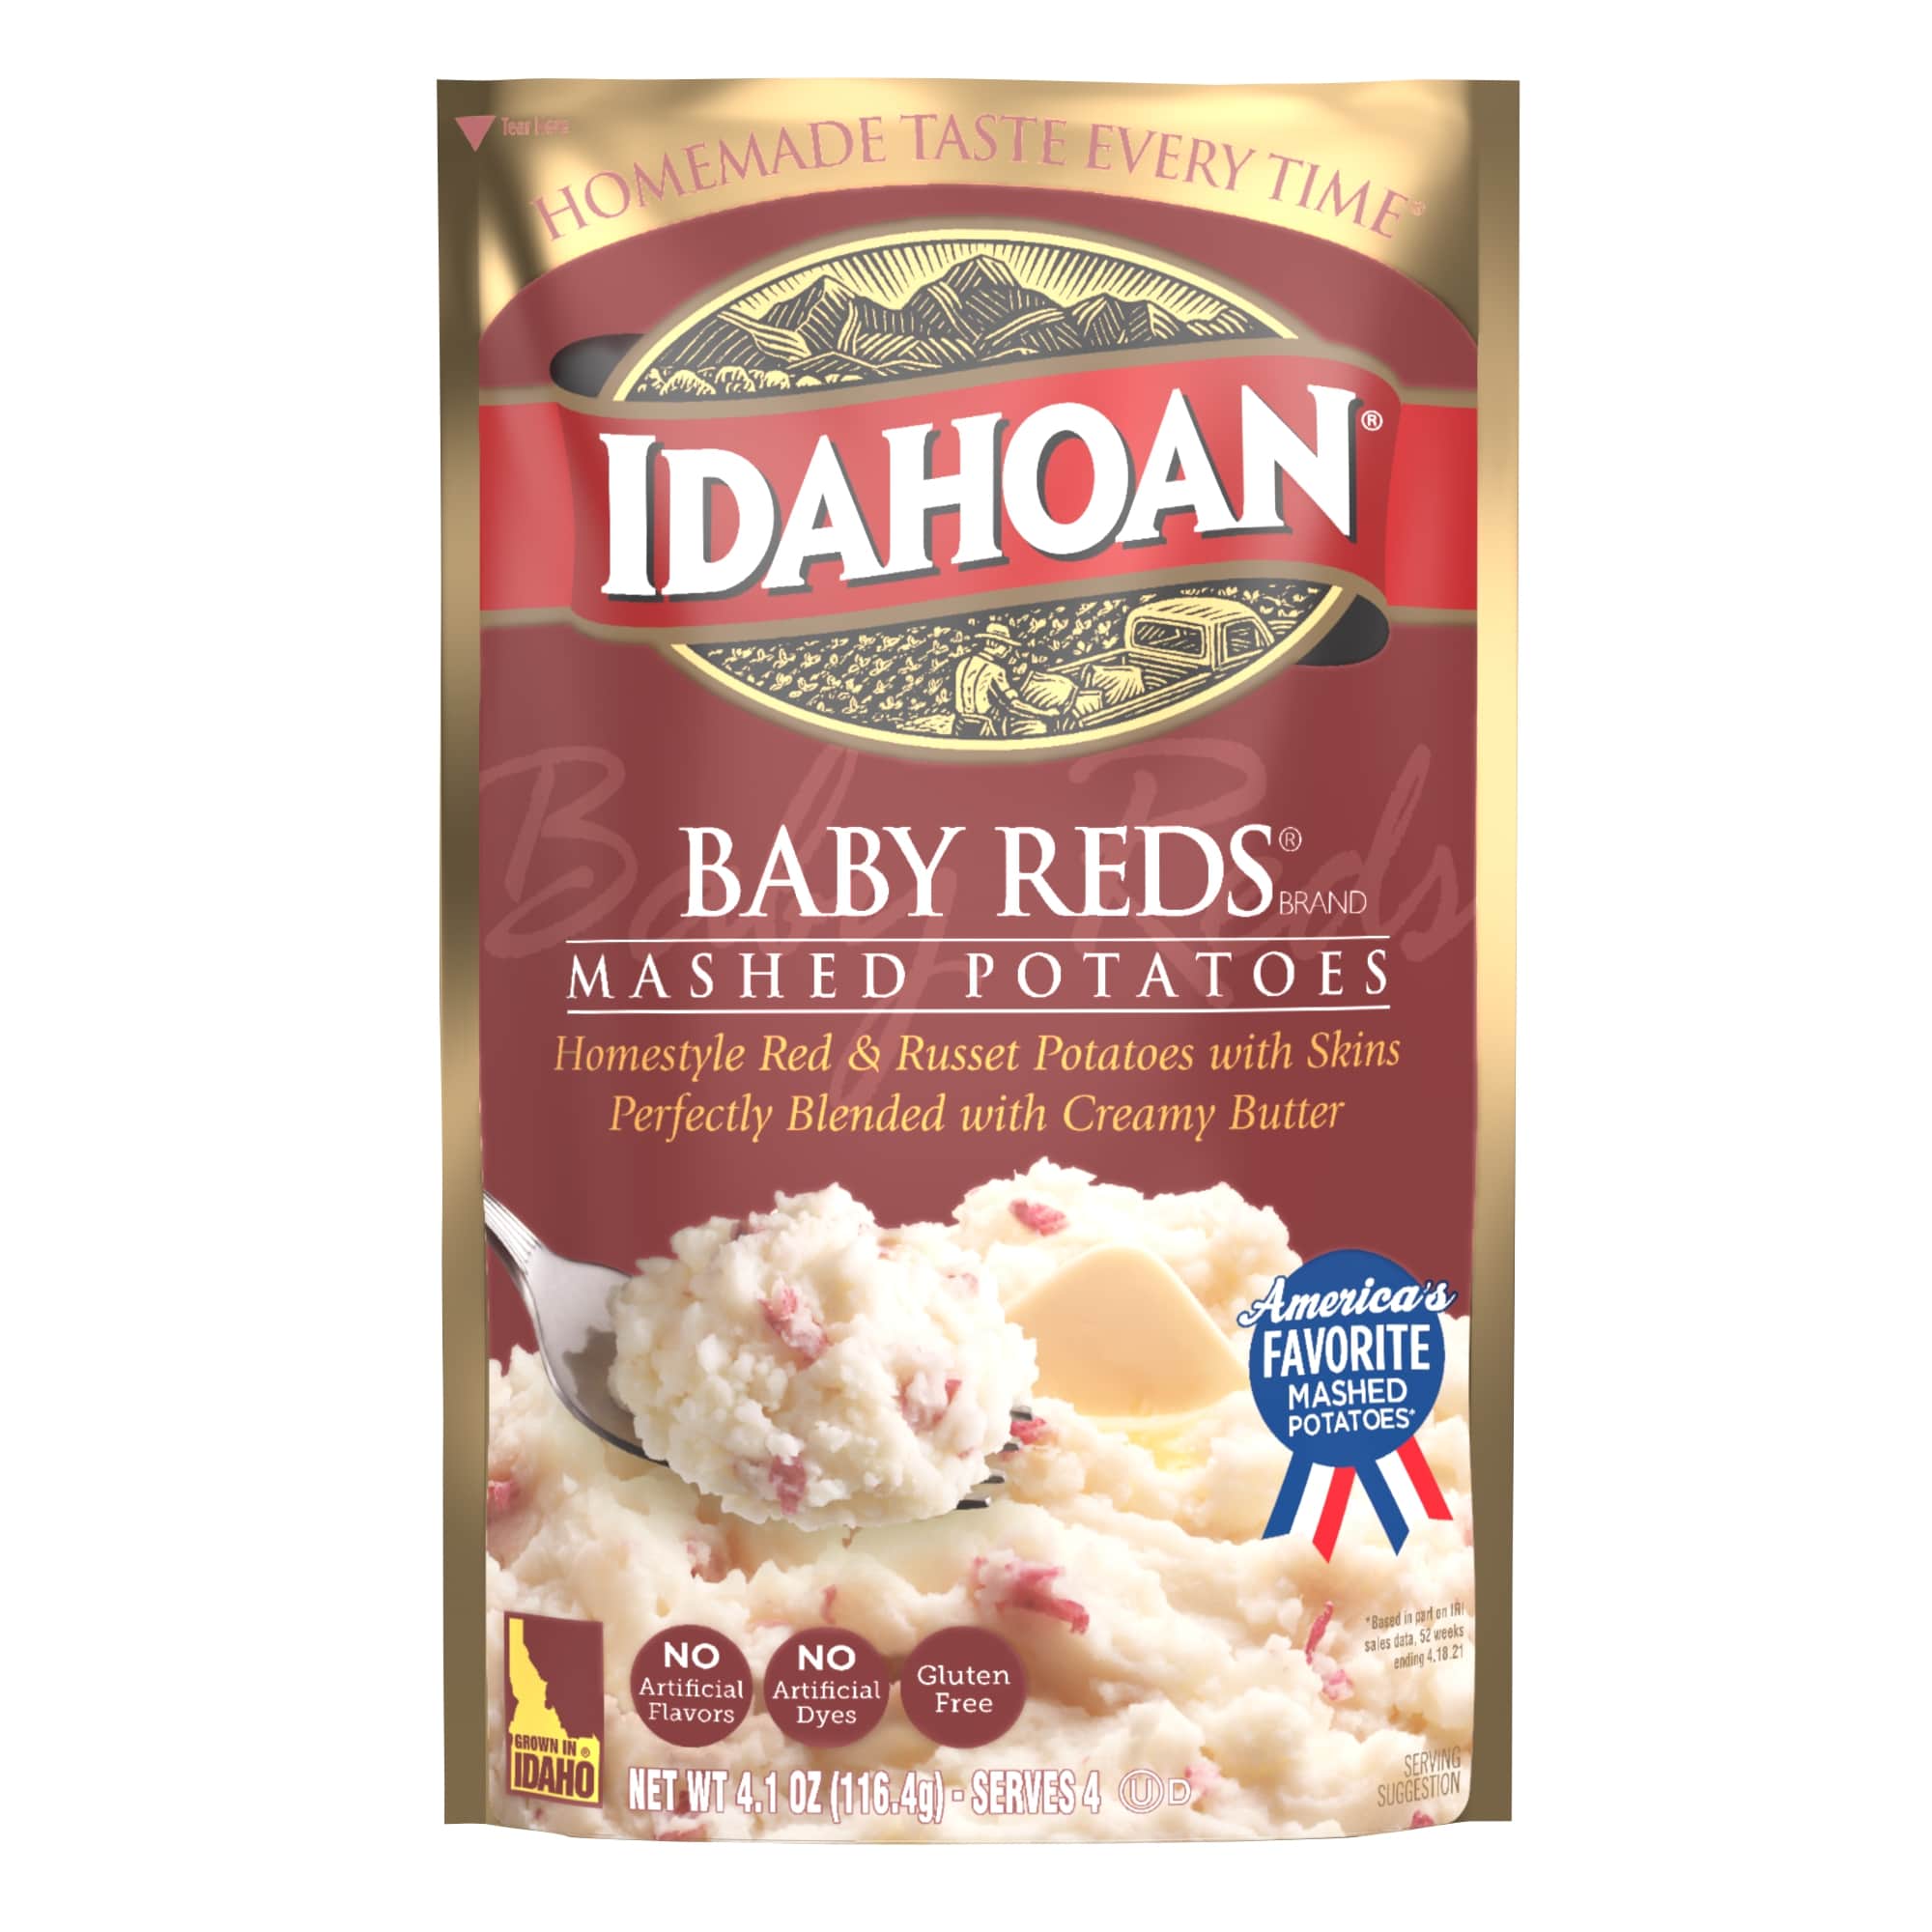 Idahoan Baby Reds Mashed Potatoes, 4.1 Ounce Pouch -- 10 per case.